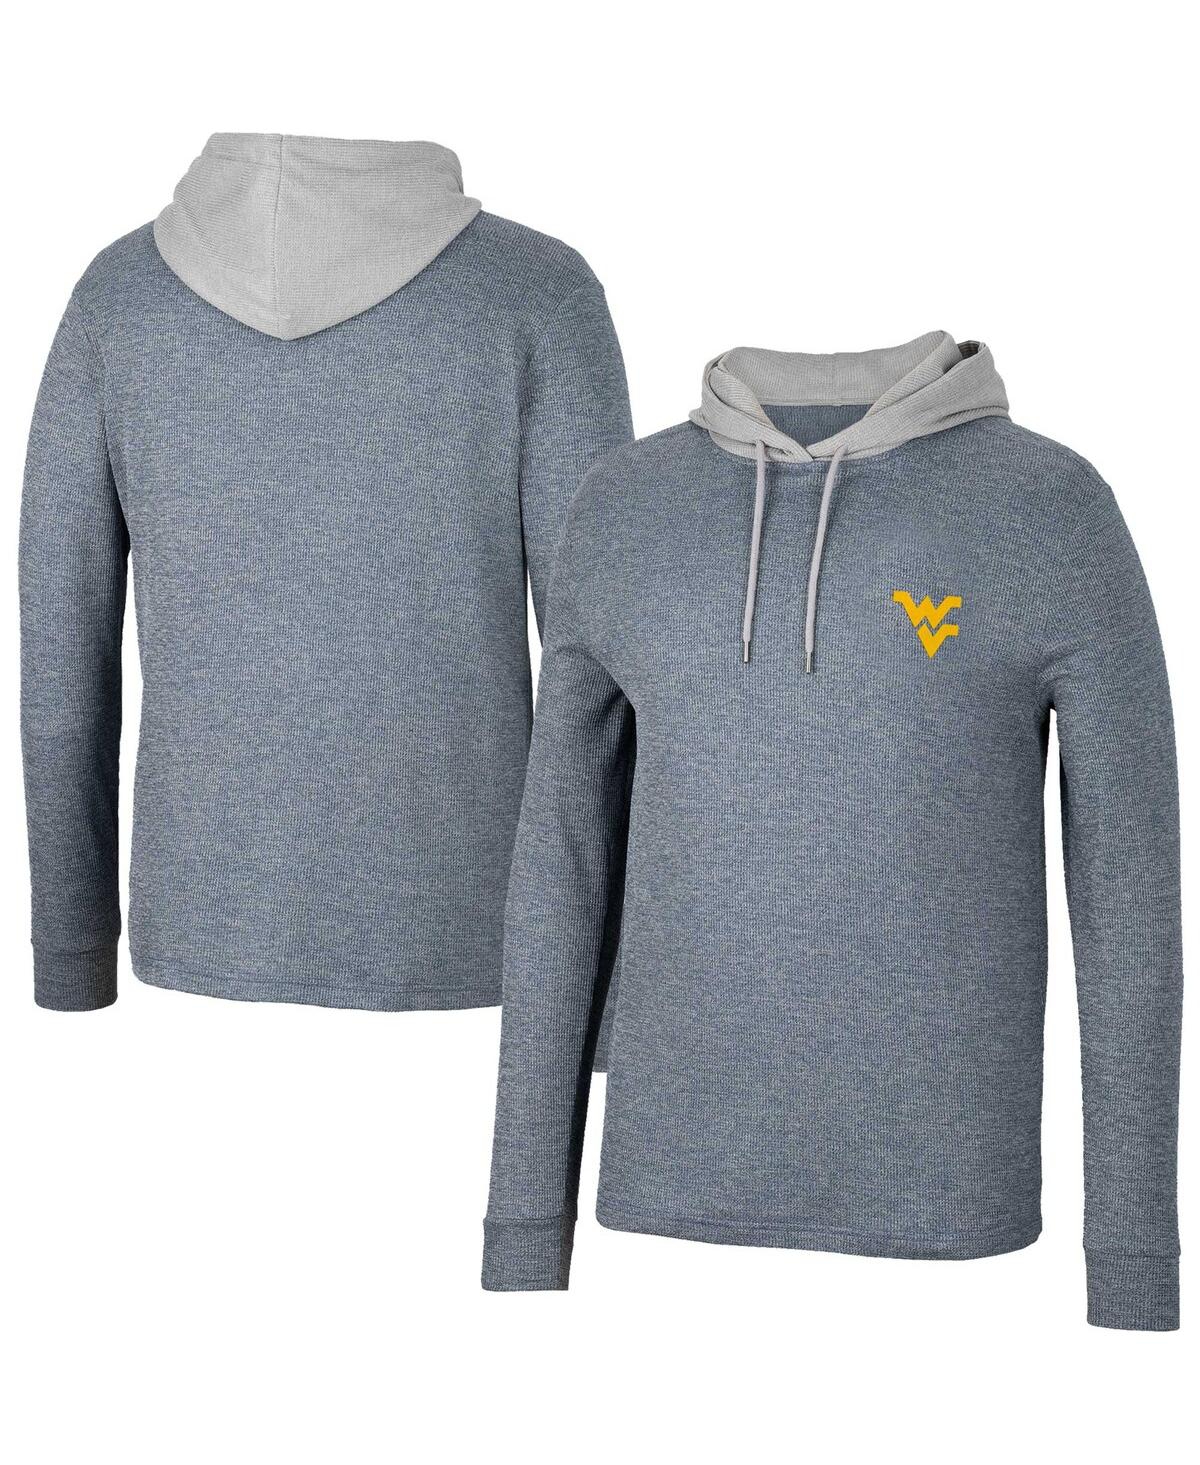 Men's Colosseum Navy West Virginia Mountaineers Ballot Waffle-Knit Thermal Long Sleeve Hoodie T-shirt - Navy